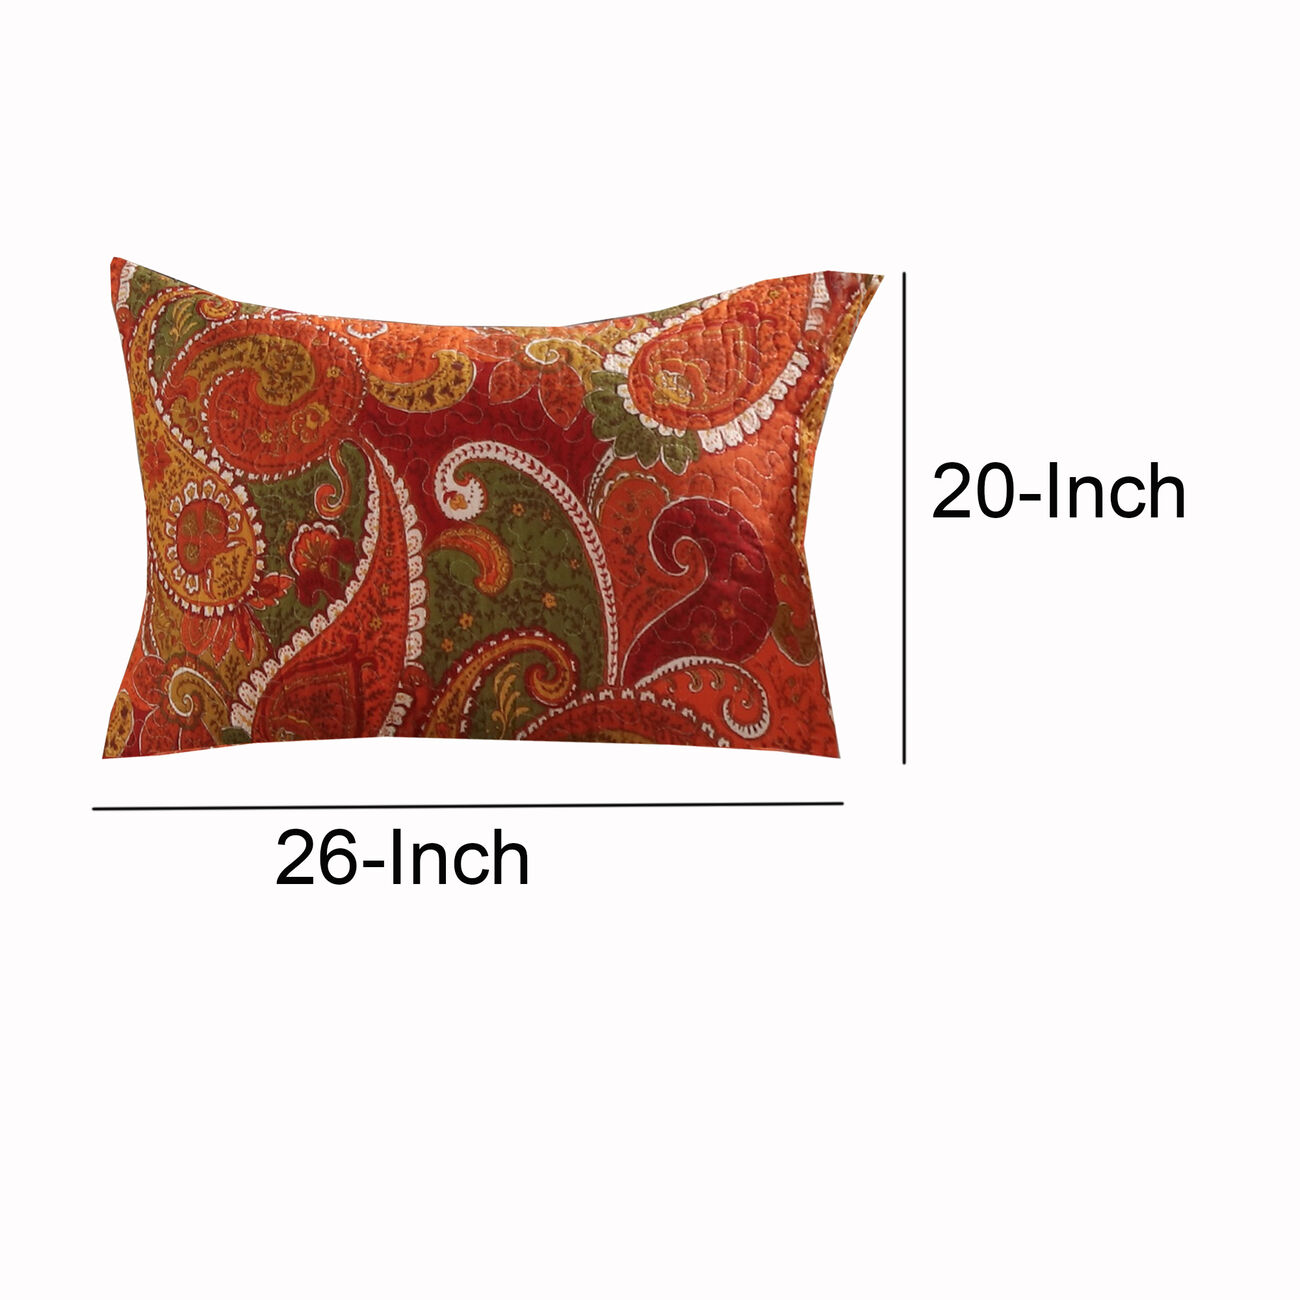 26 x 20 Polyester Standard Size Pillow Sham with Paisley Print, Cinnamon Red